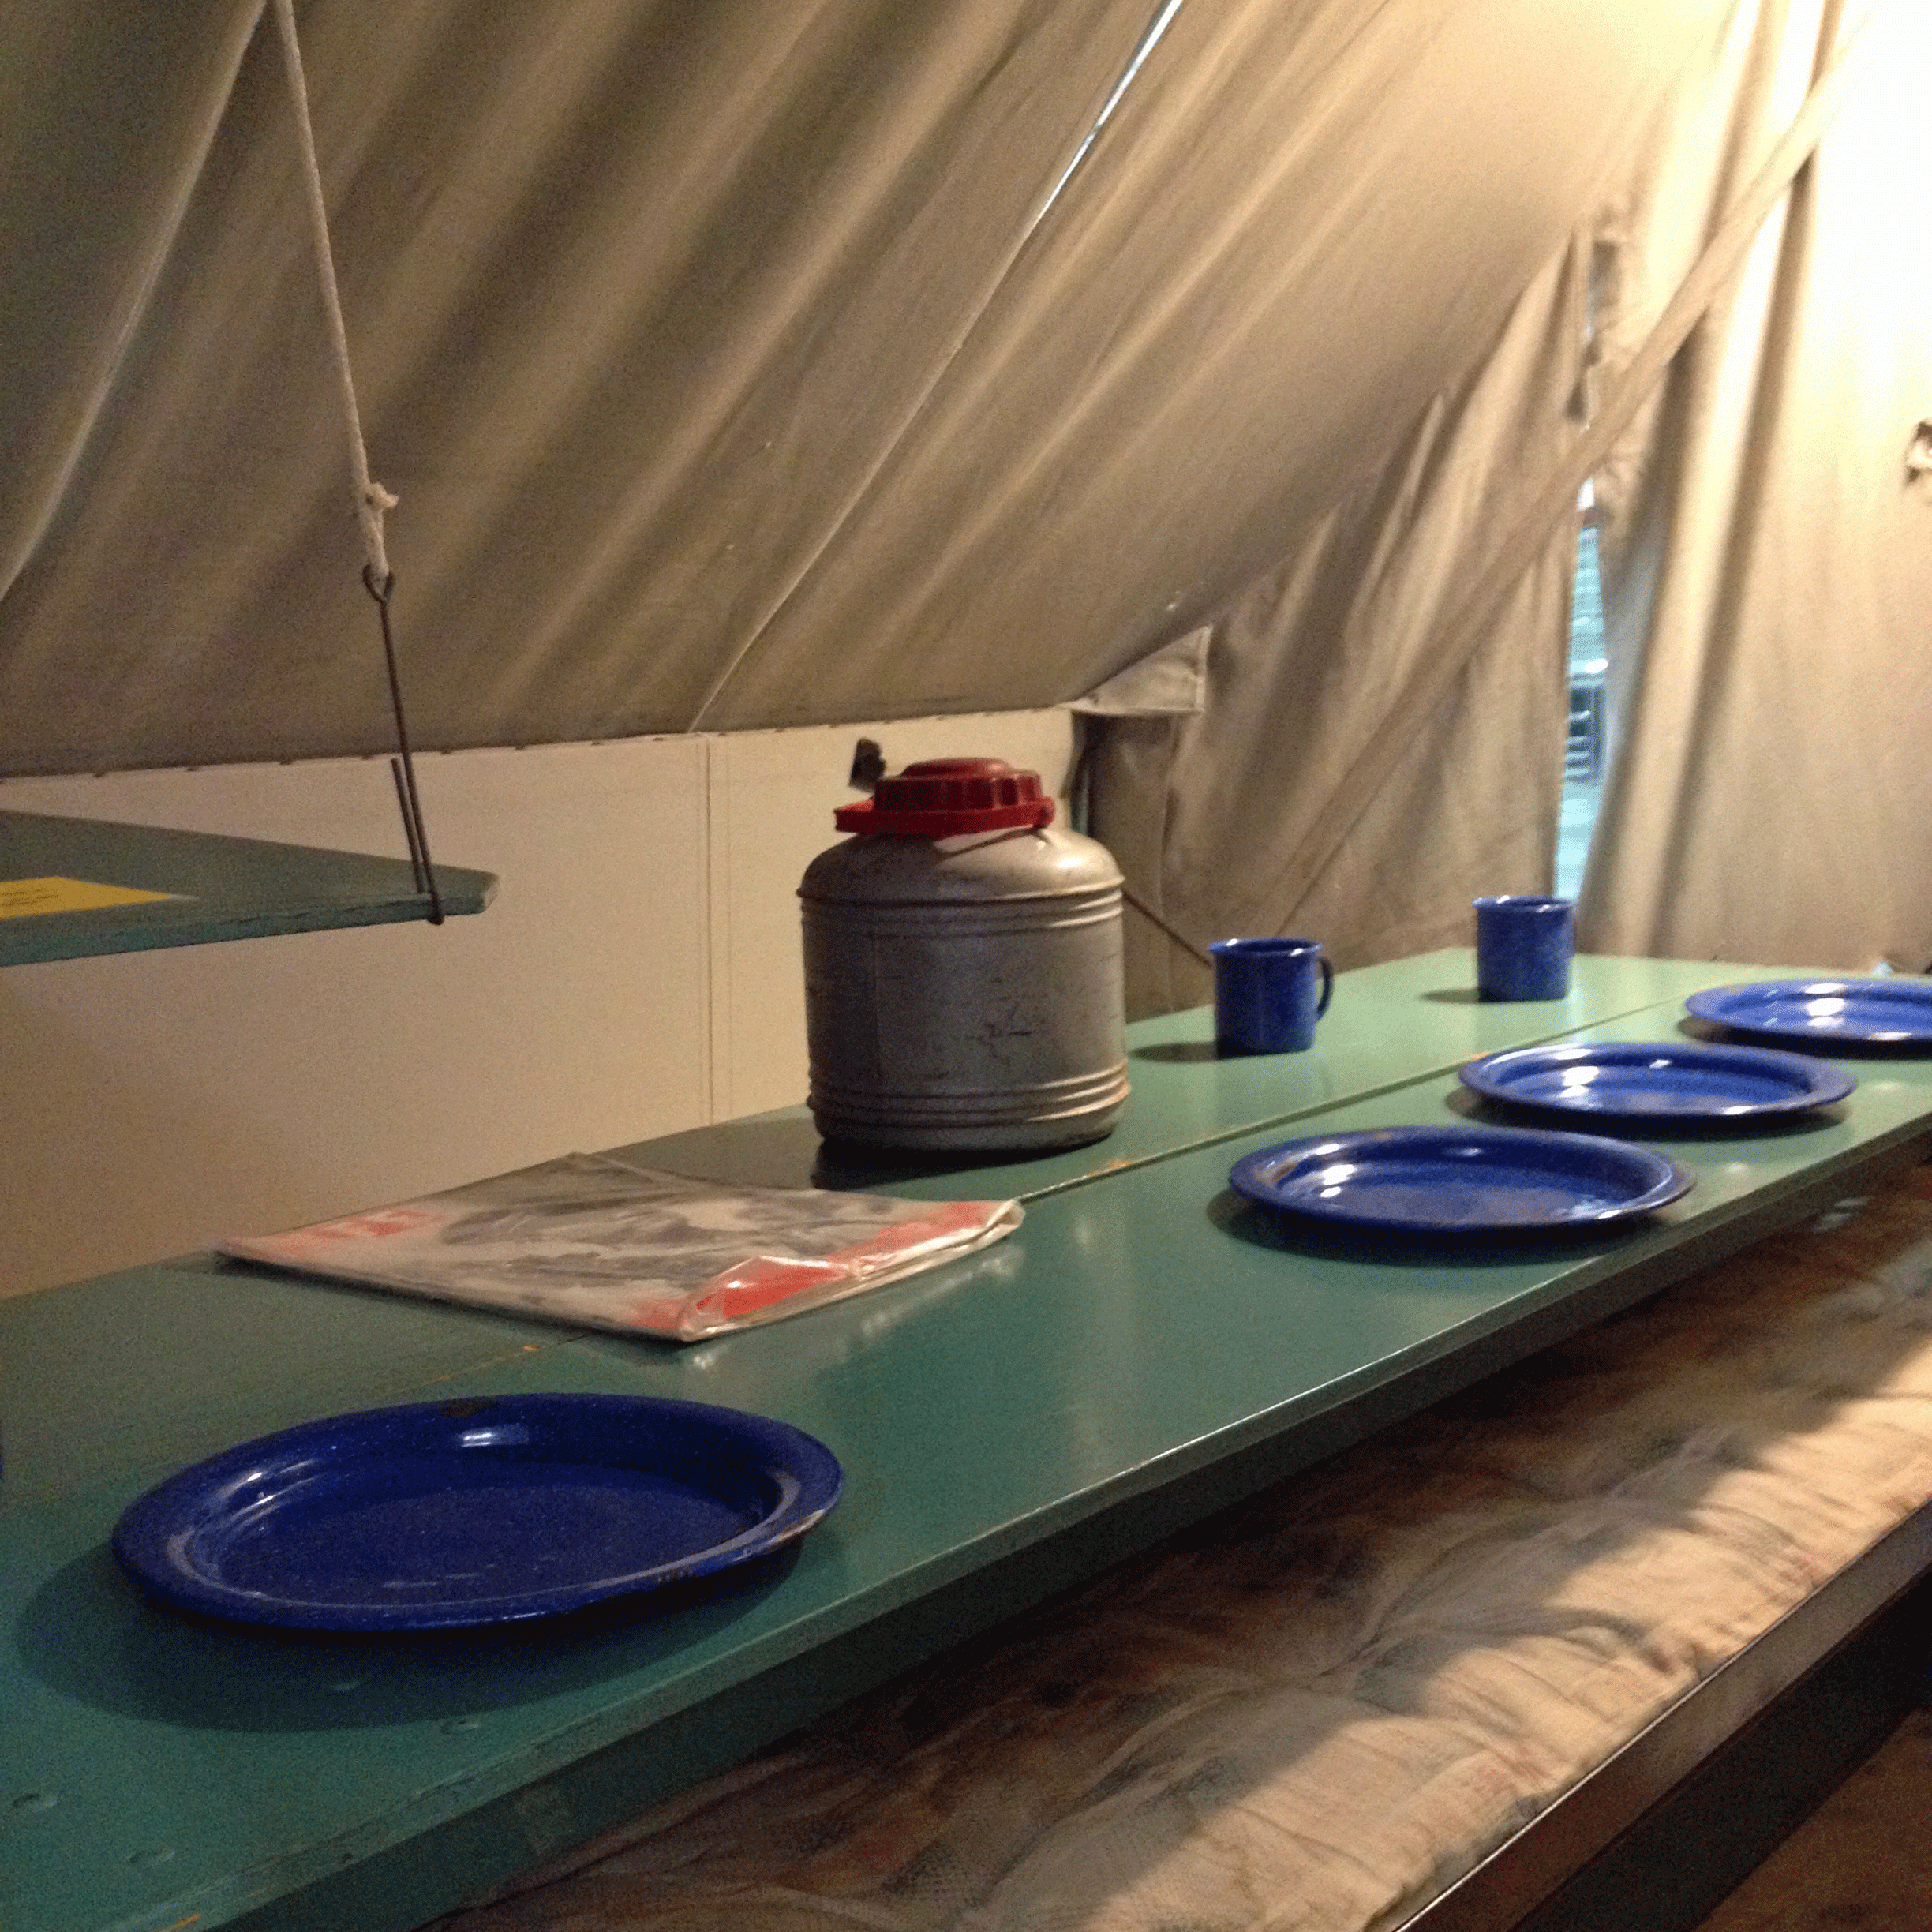 1937 Kozy Kamp Pop Up trailer all decked out for an indoor picnic